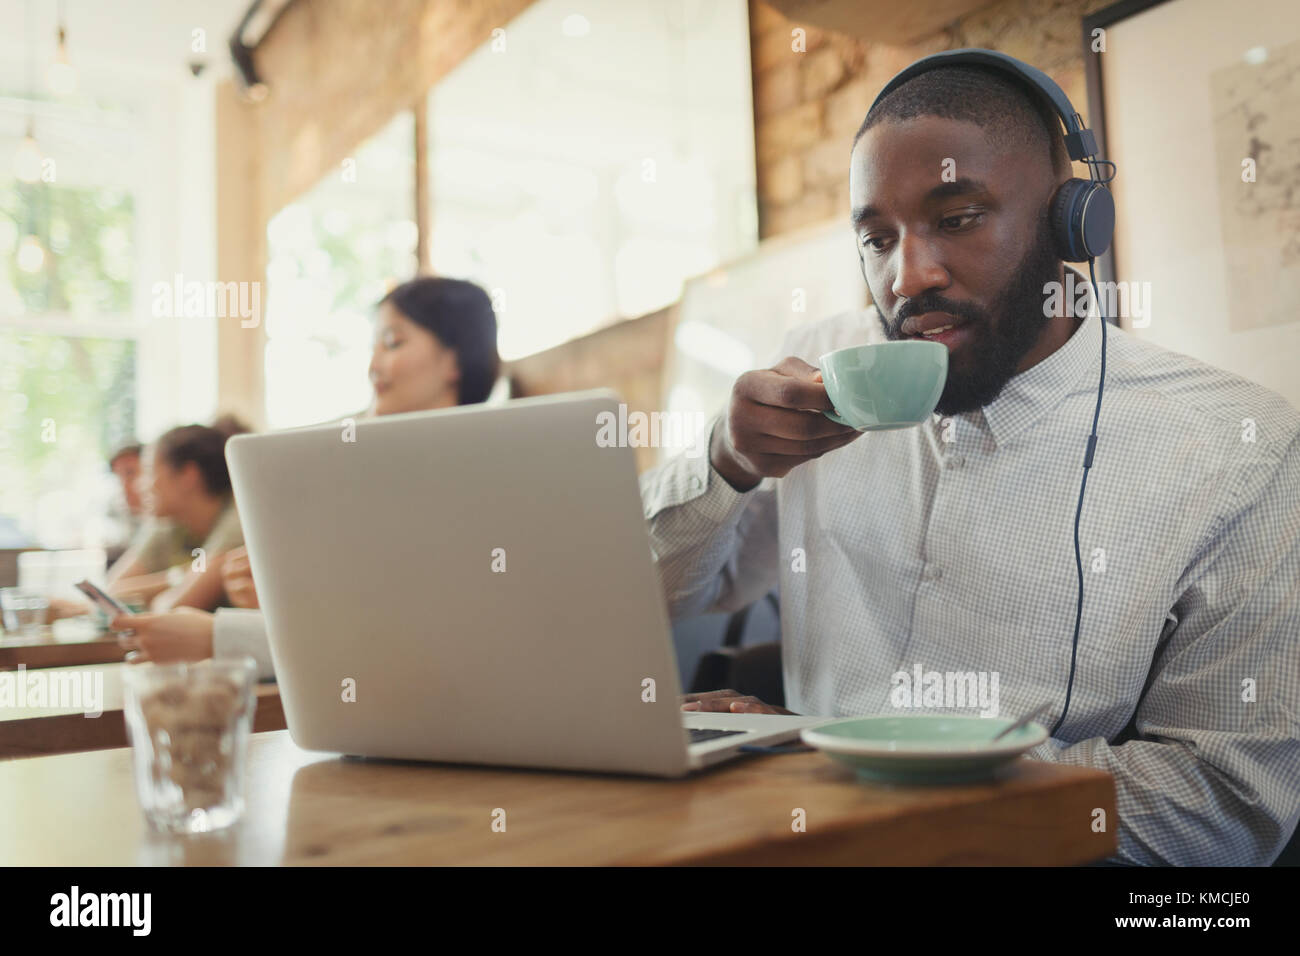 Man with headphones using laptop and drinking coffee in cafe Stock Photo